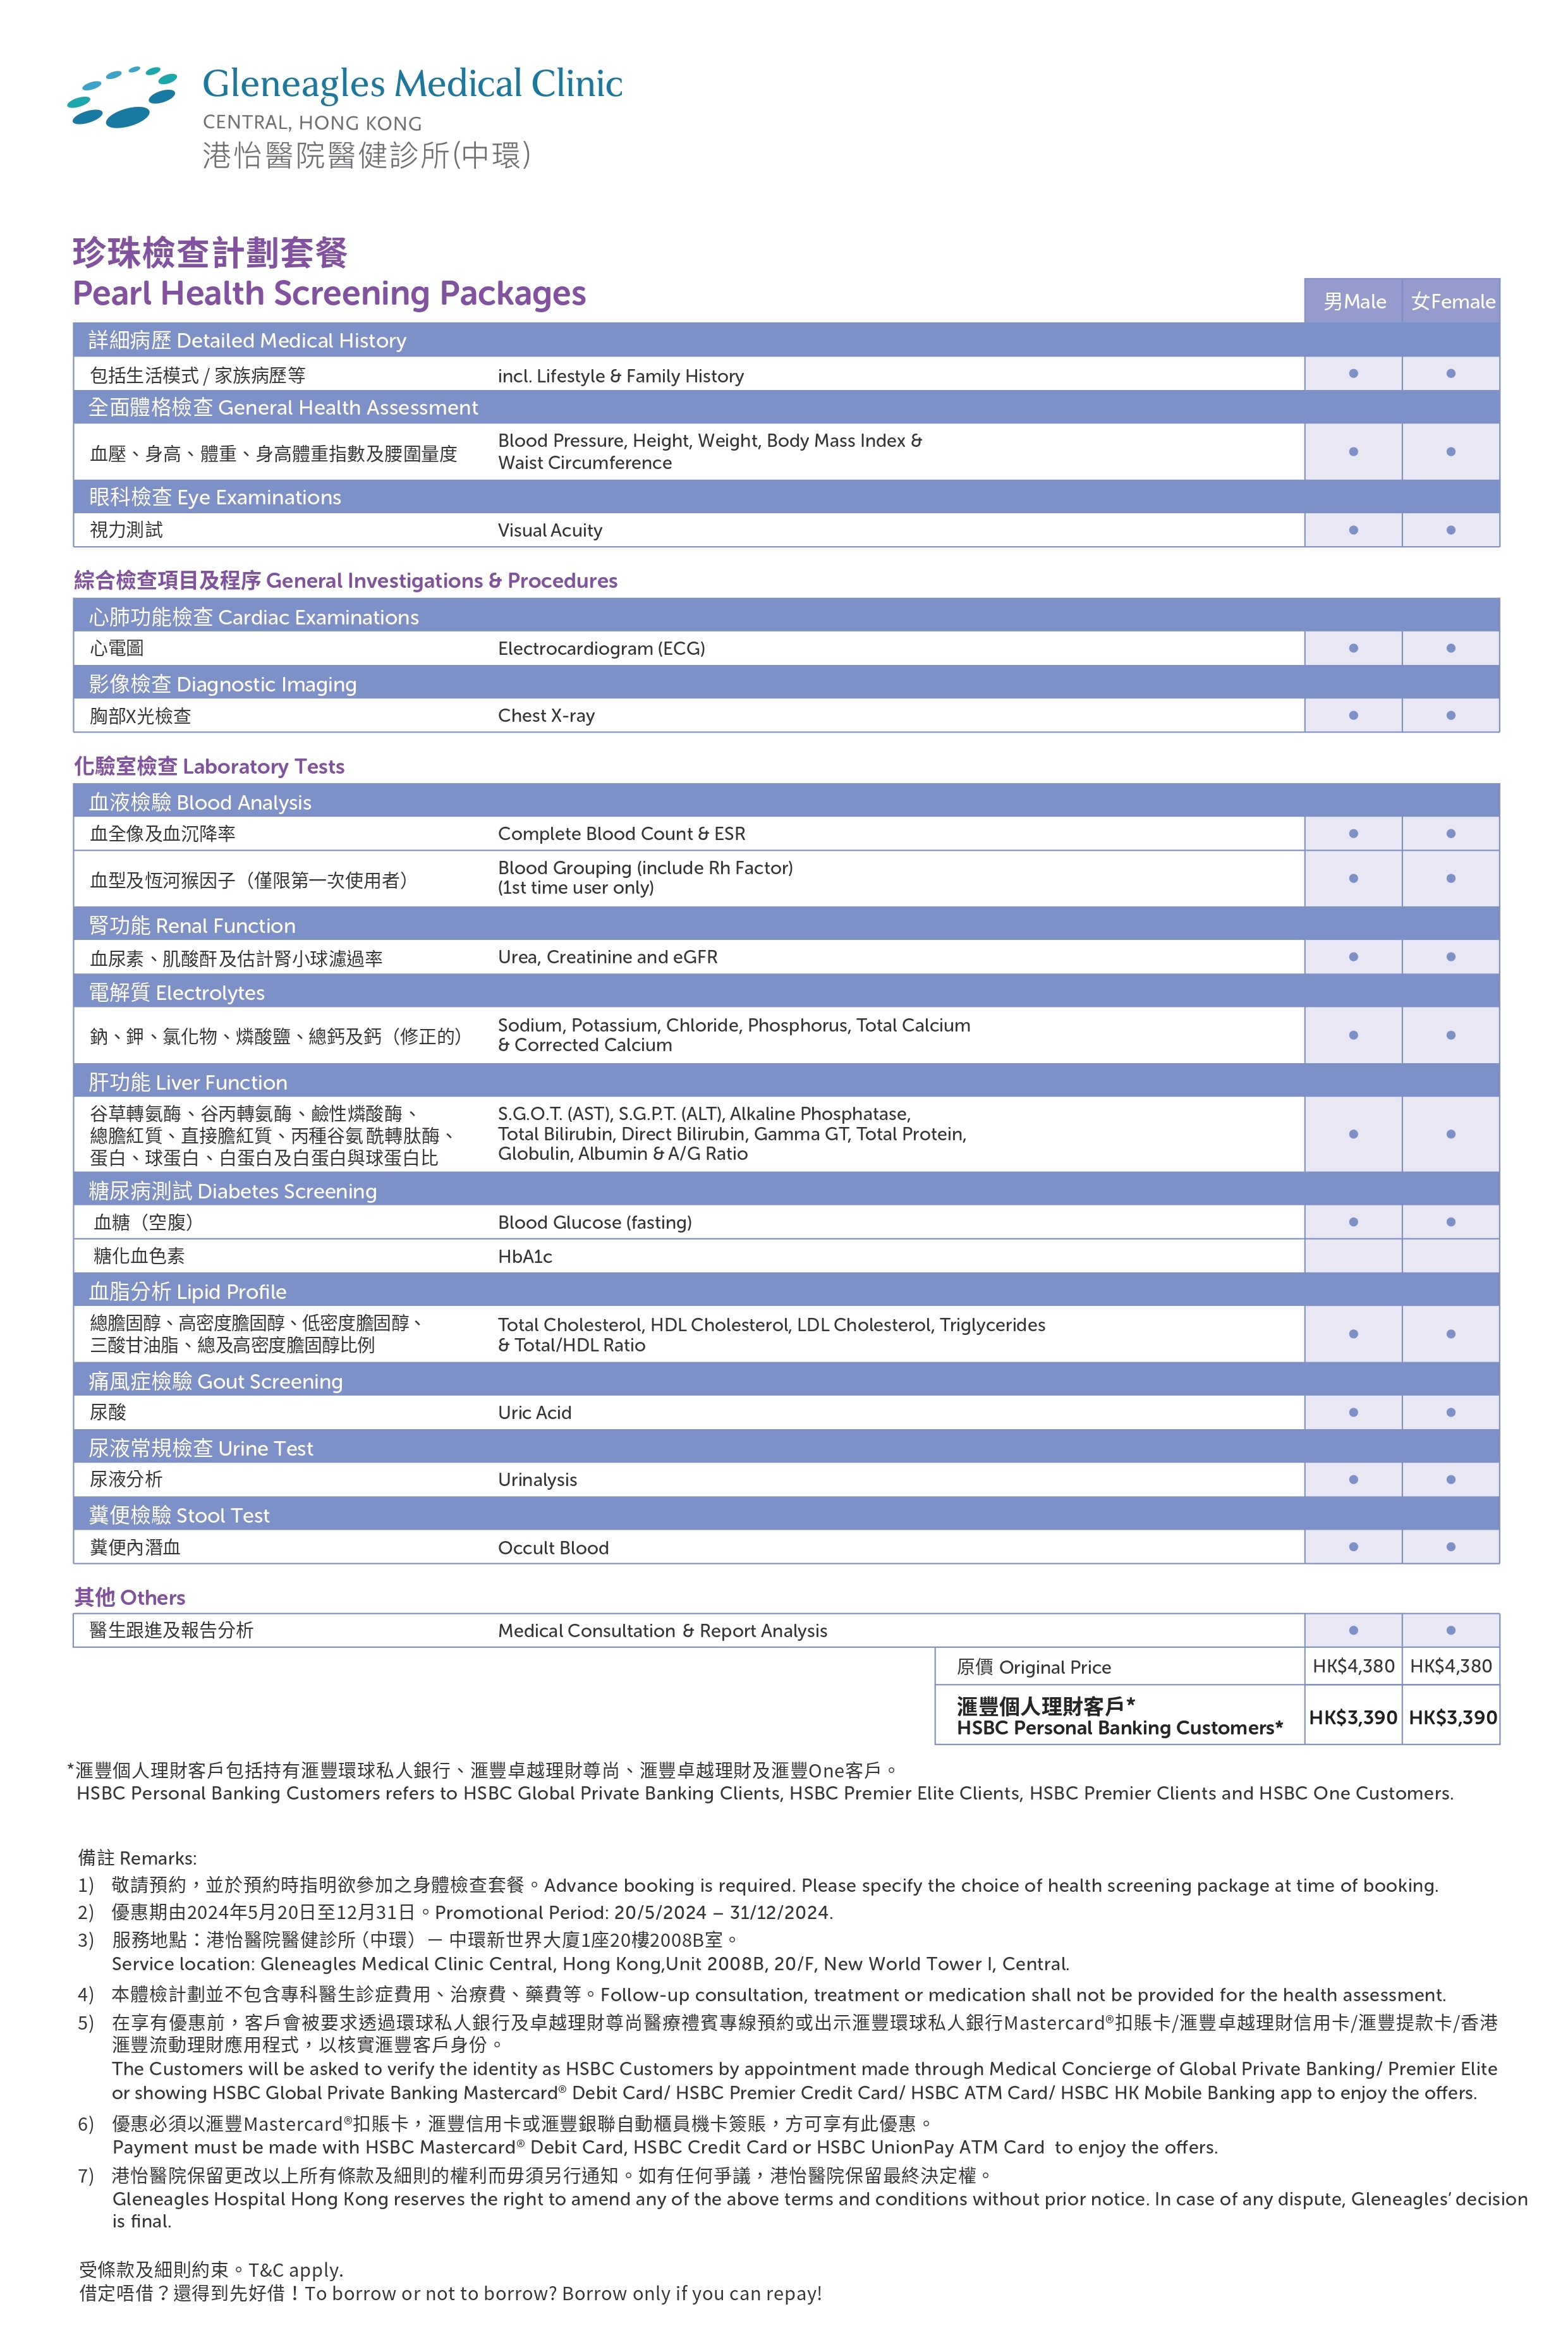 GMC-珍珠檢查計劃套餐-Pearl-Health-Screening-Packages_page-0001.jpg#asset:279830